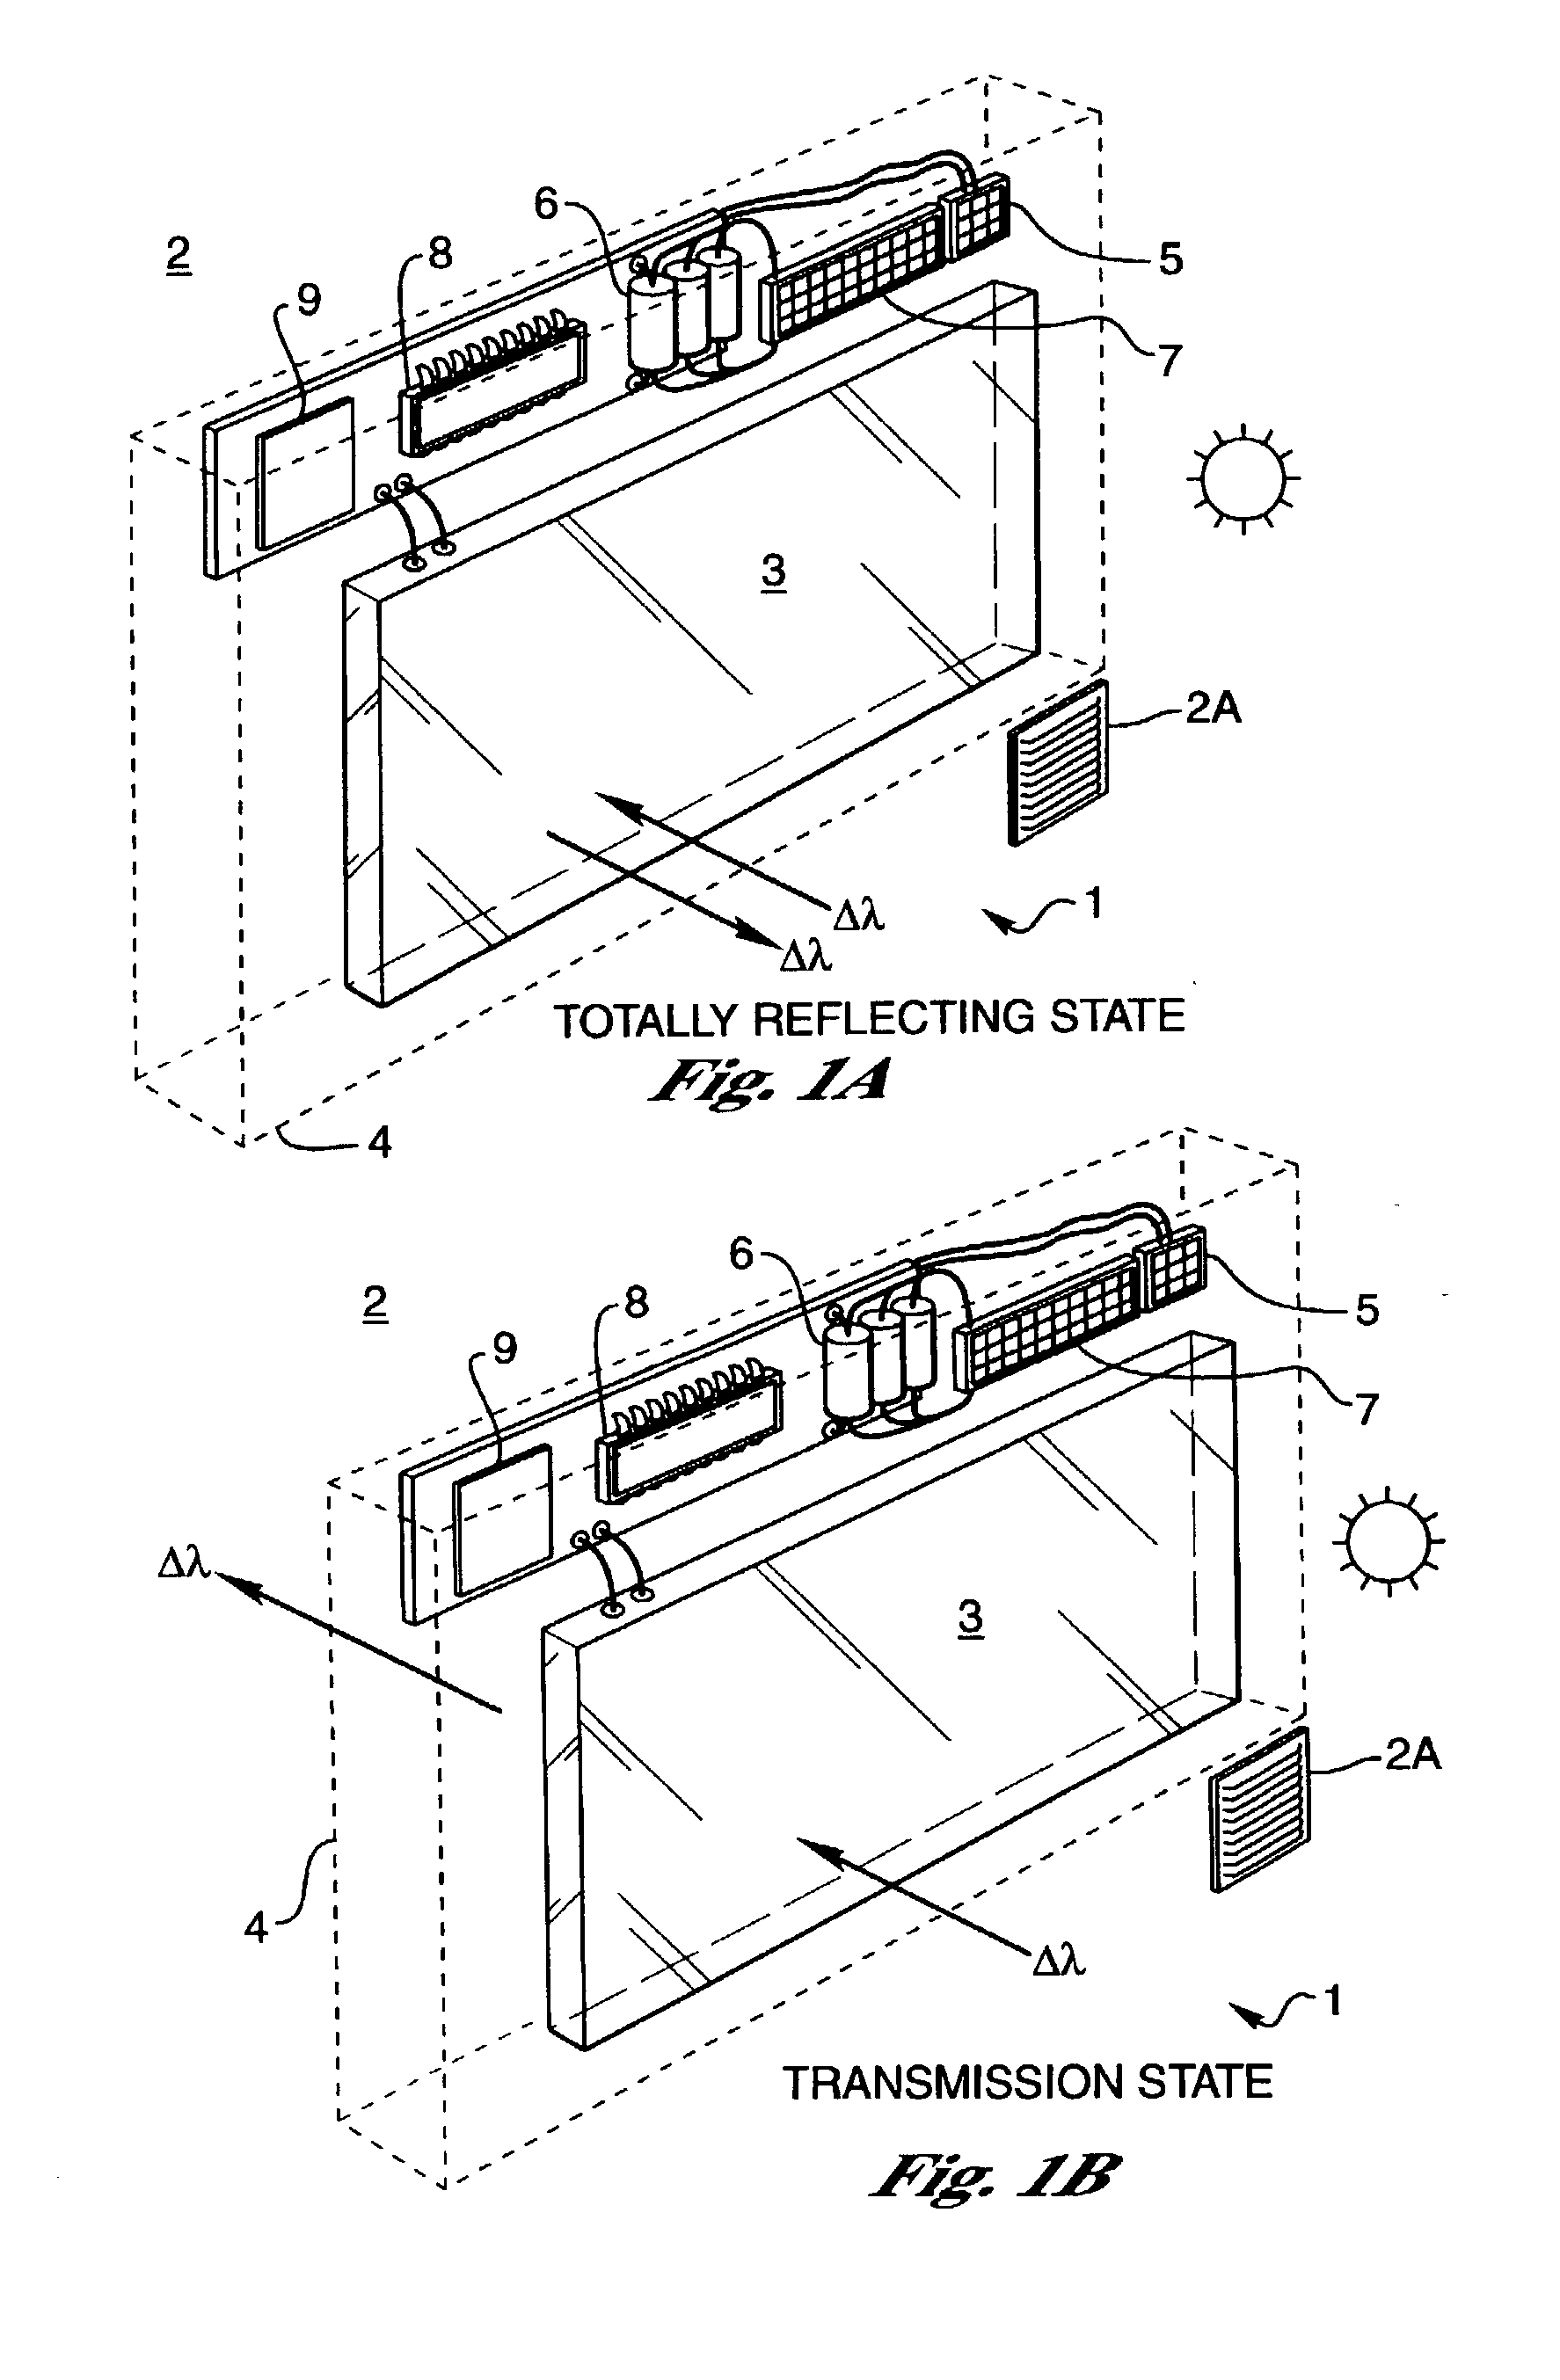 Electro-optical glazing structures having reflection and transparent modes of operation